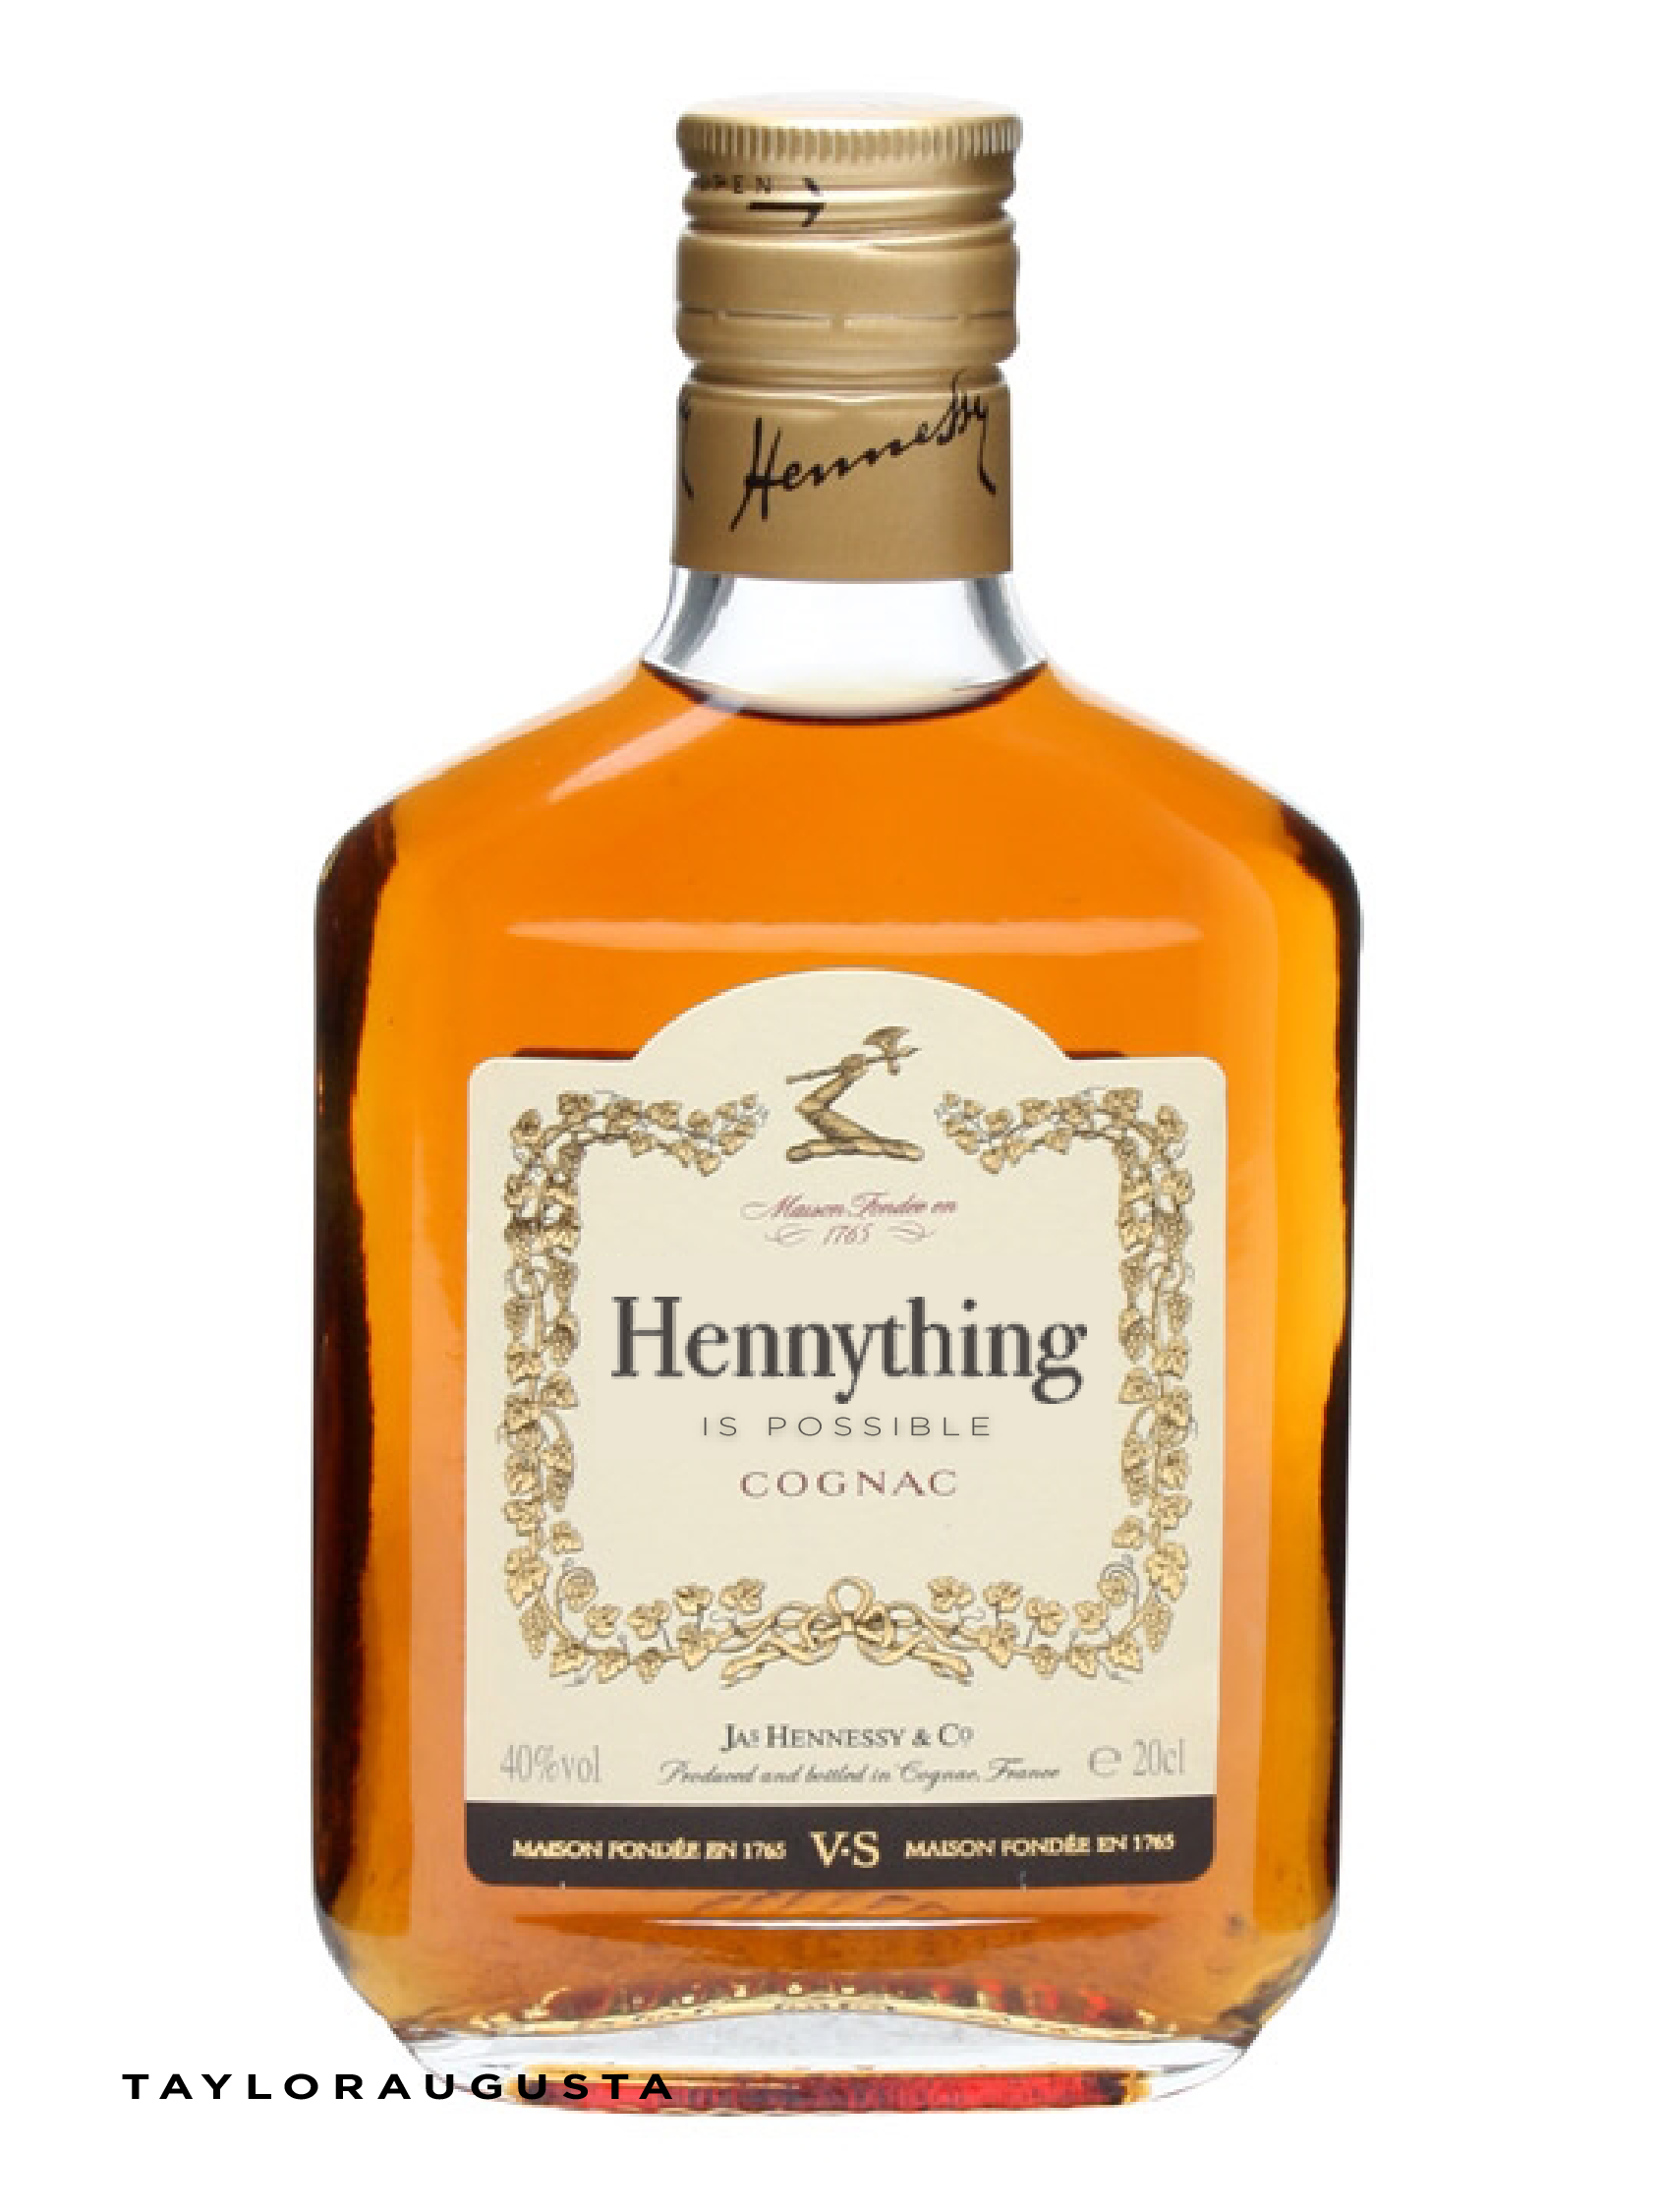 Hennything-is-Possible-Final.png